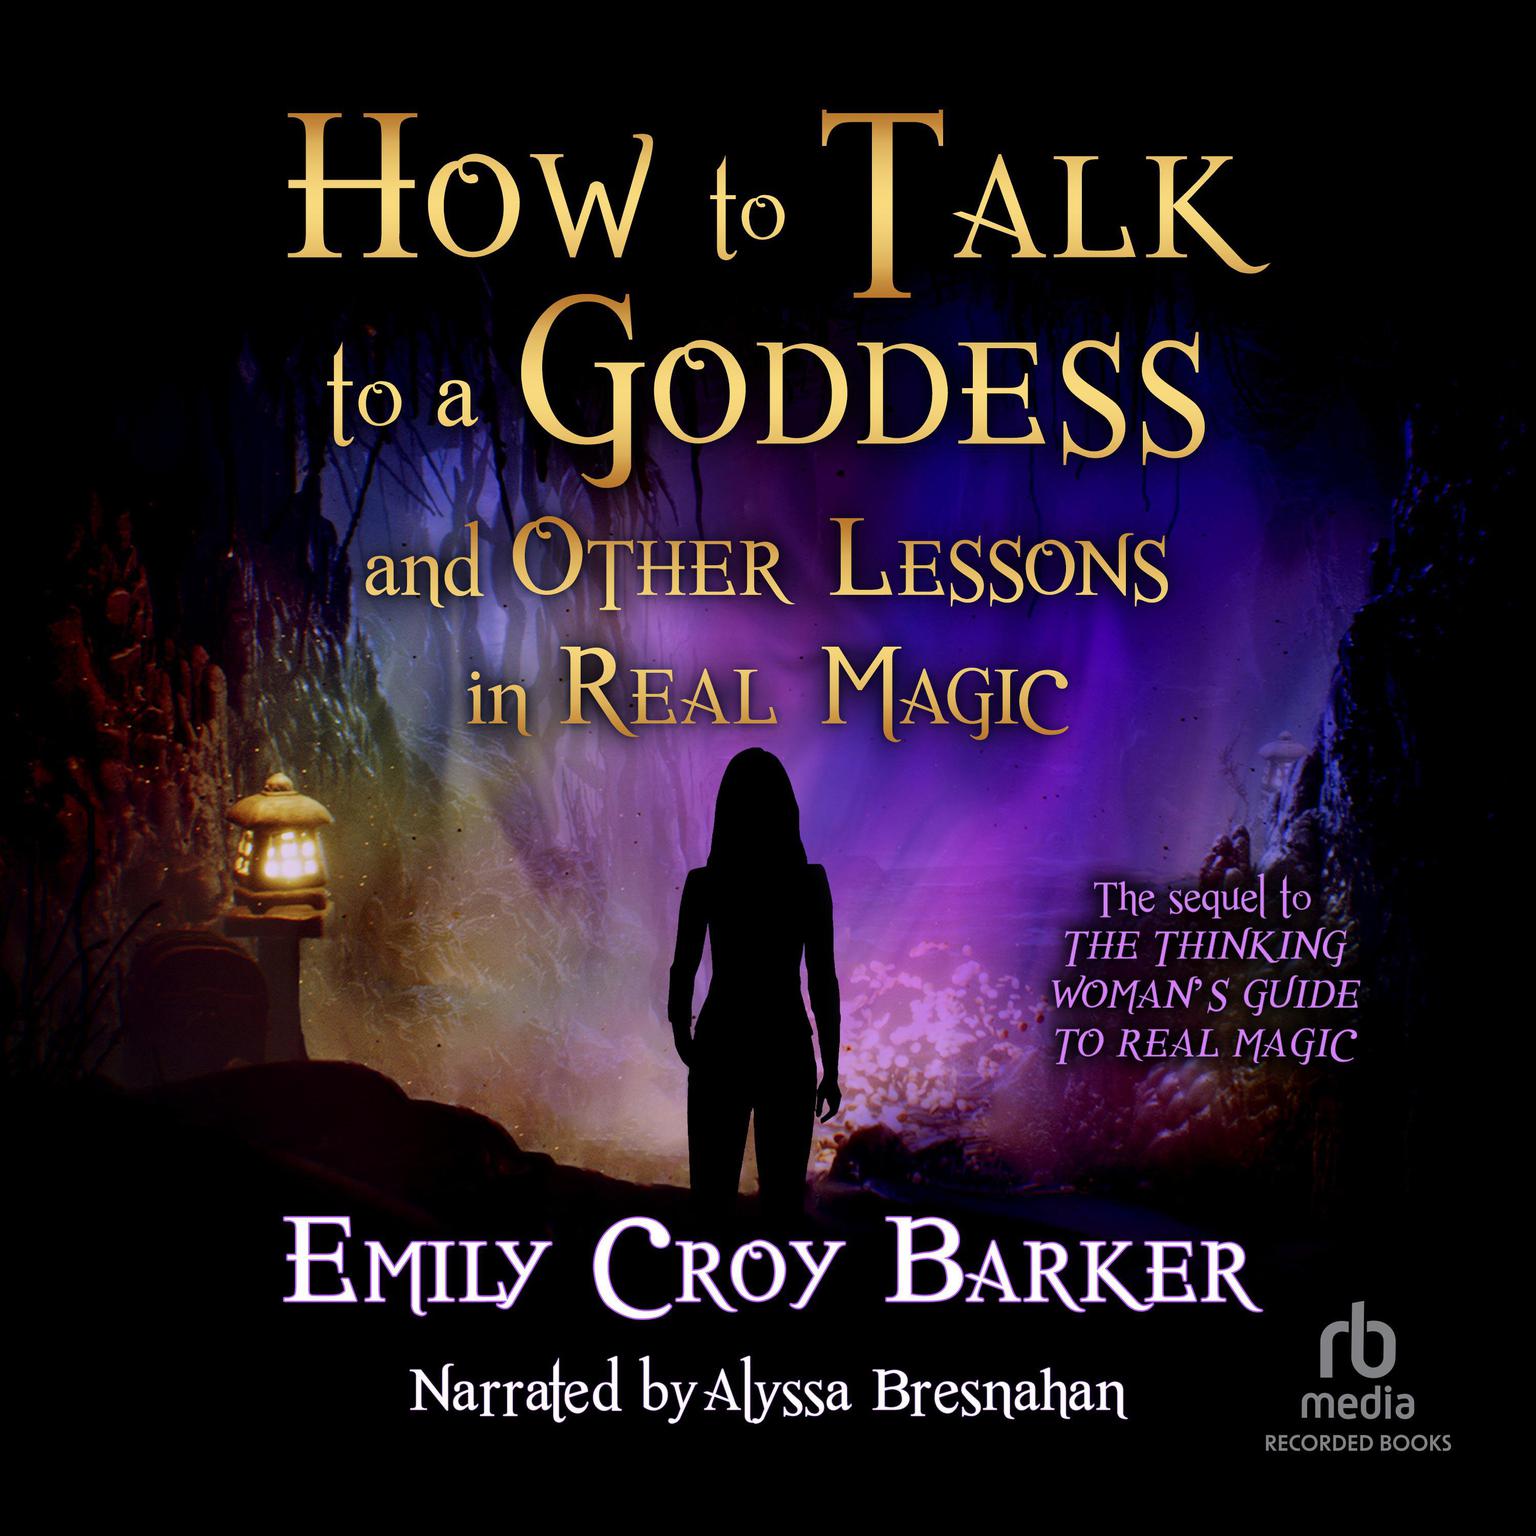 How to Talk to a Goddess (And Other Lessons in Real Magic): (And Other Lessons in Real Magic) Audiobook, by Emily Croy Barker